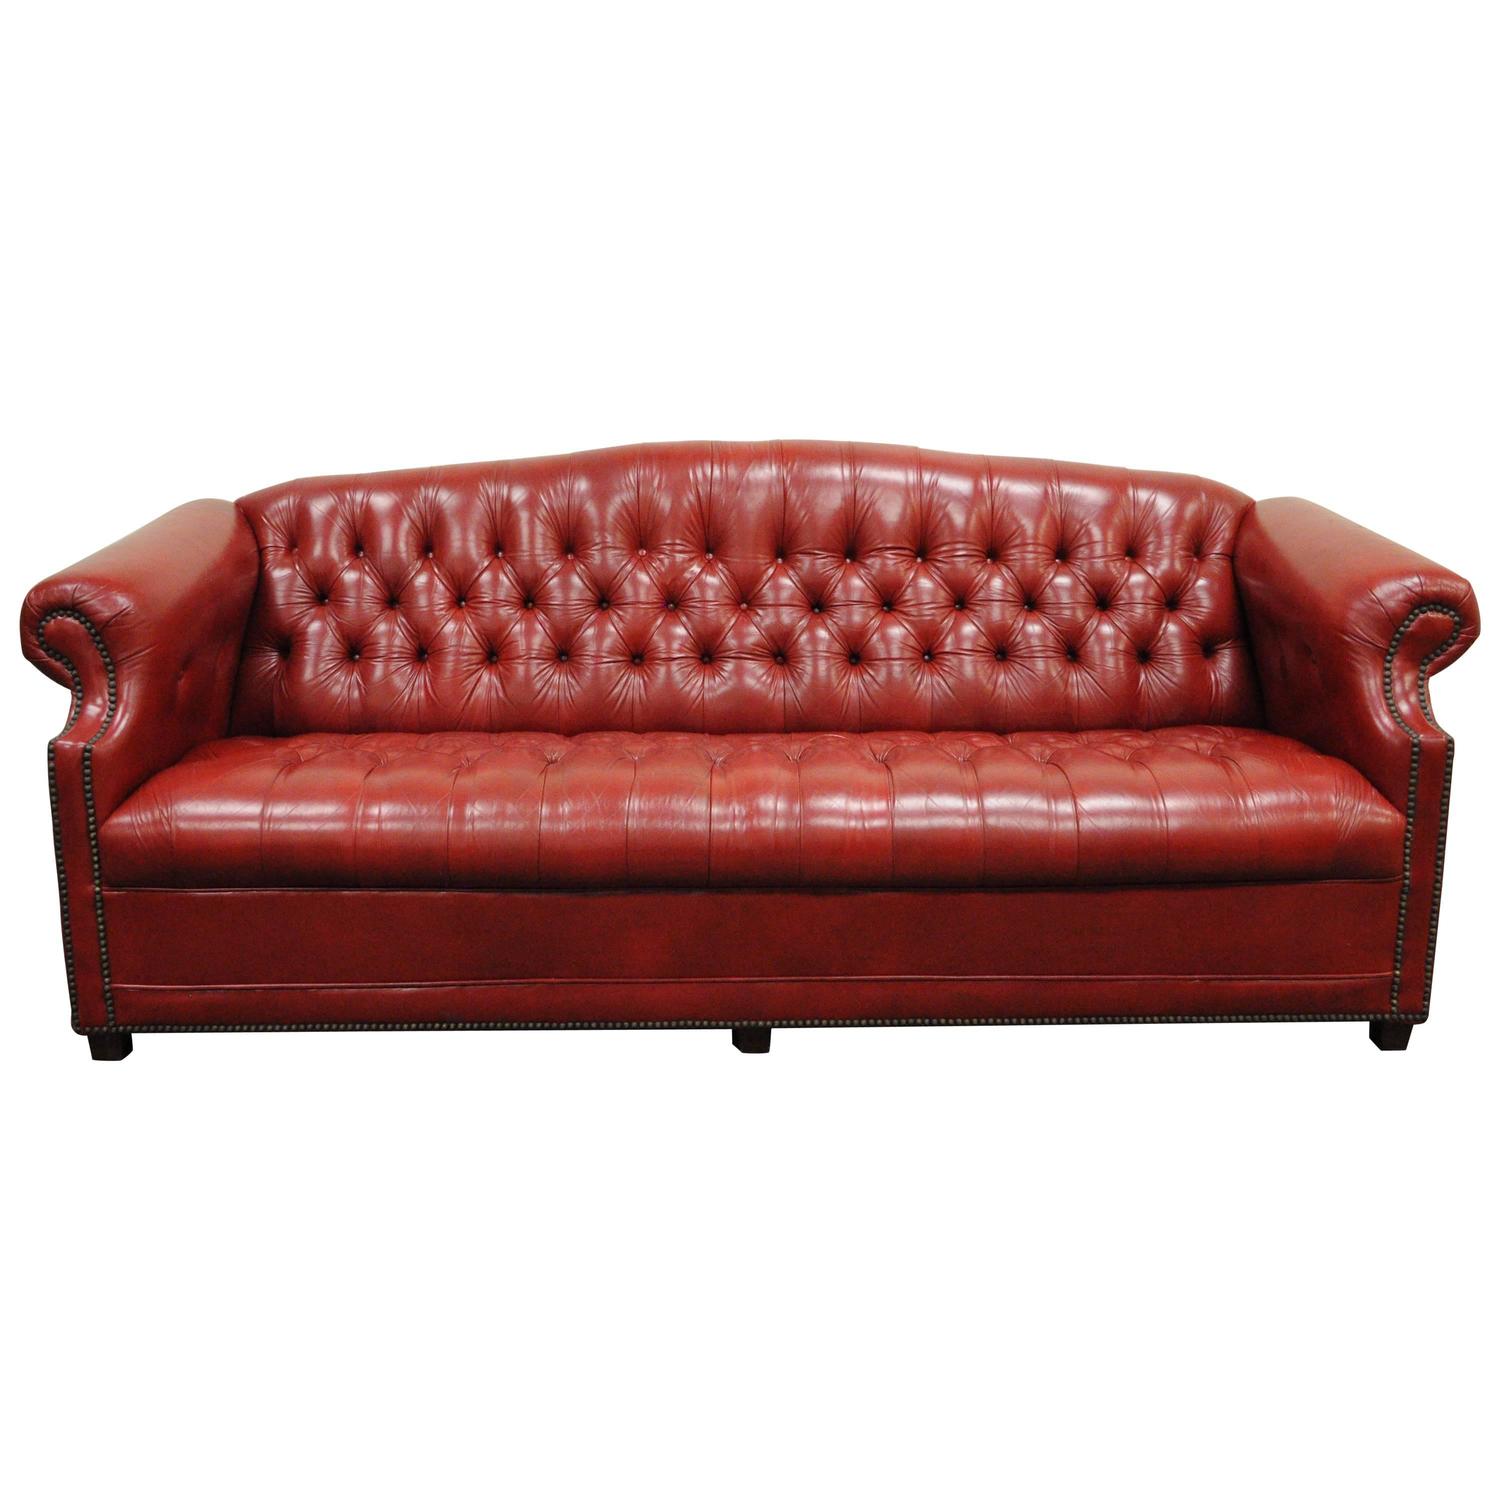 Chesterfield Leather Sofa Oxblood Red Three Seat Couch Retro